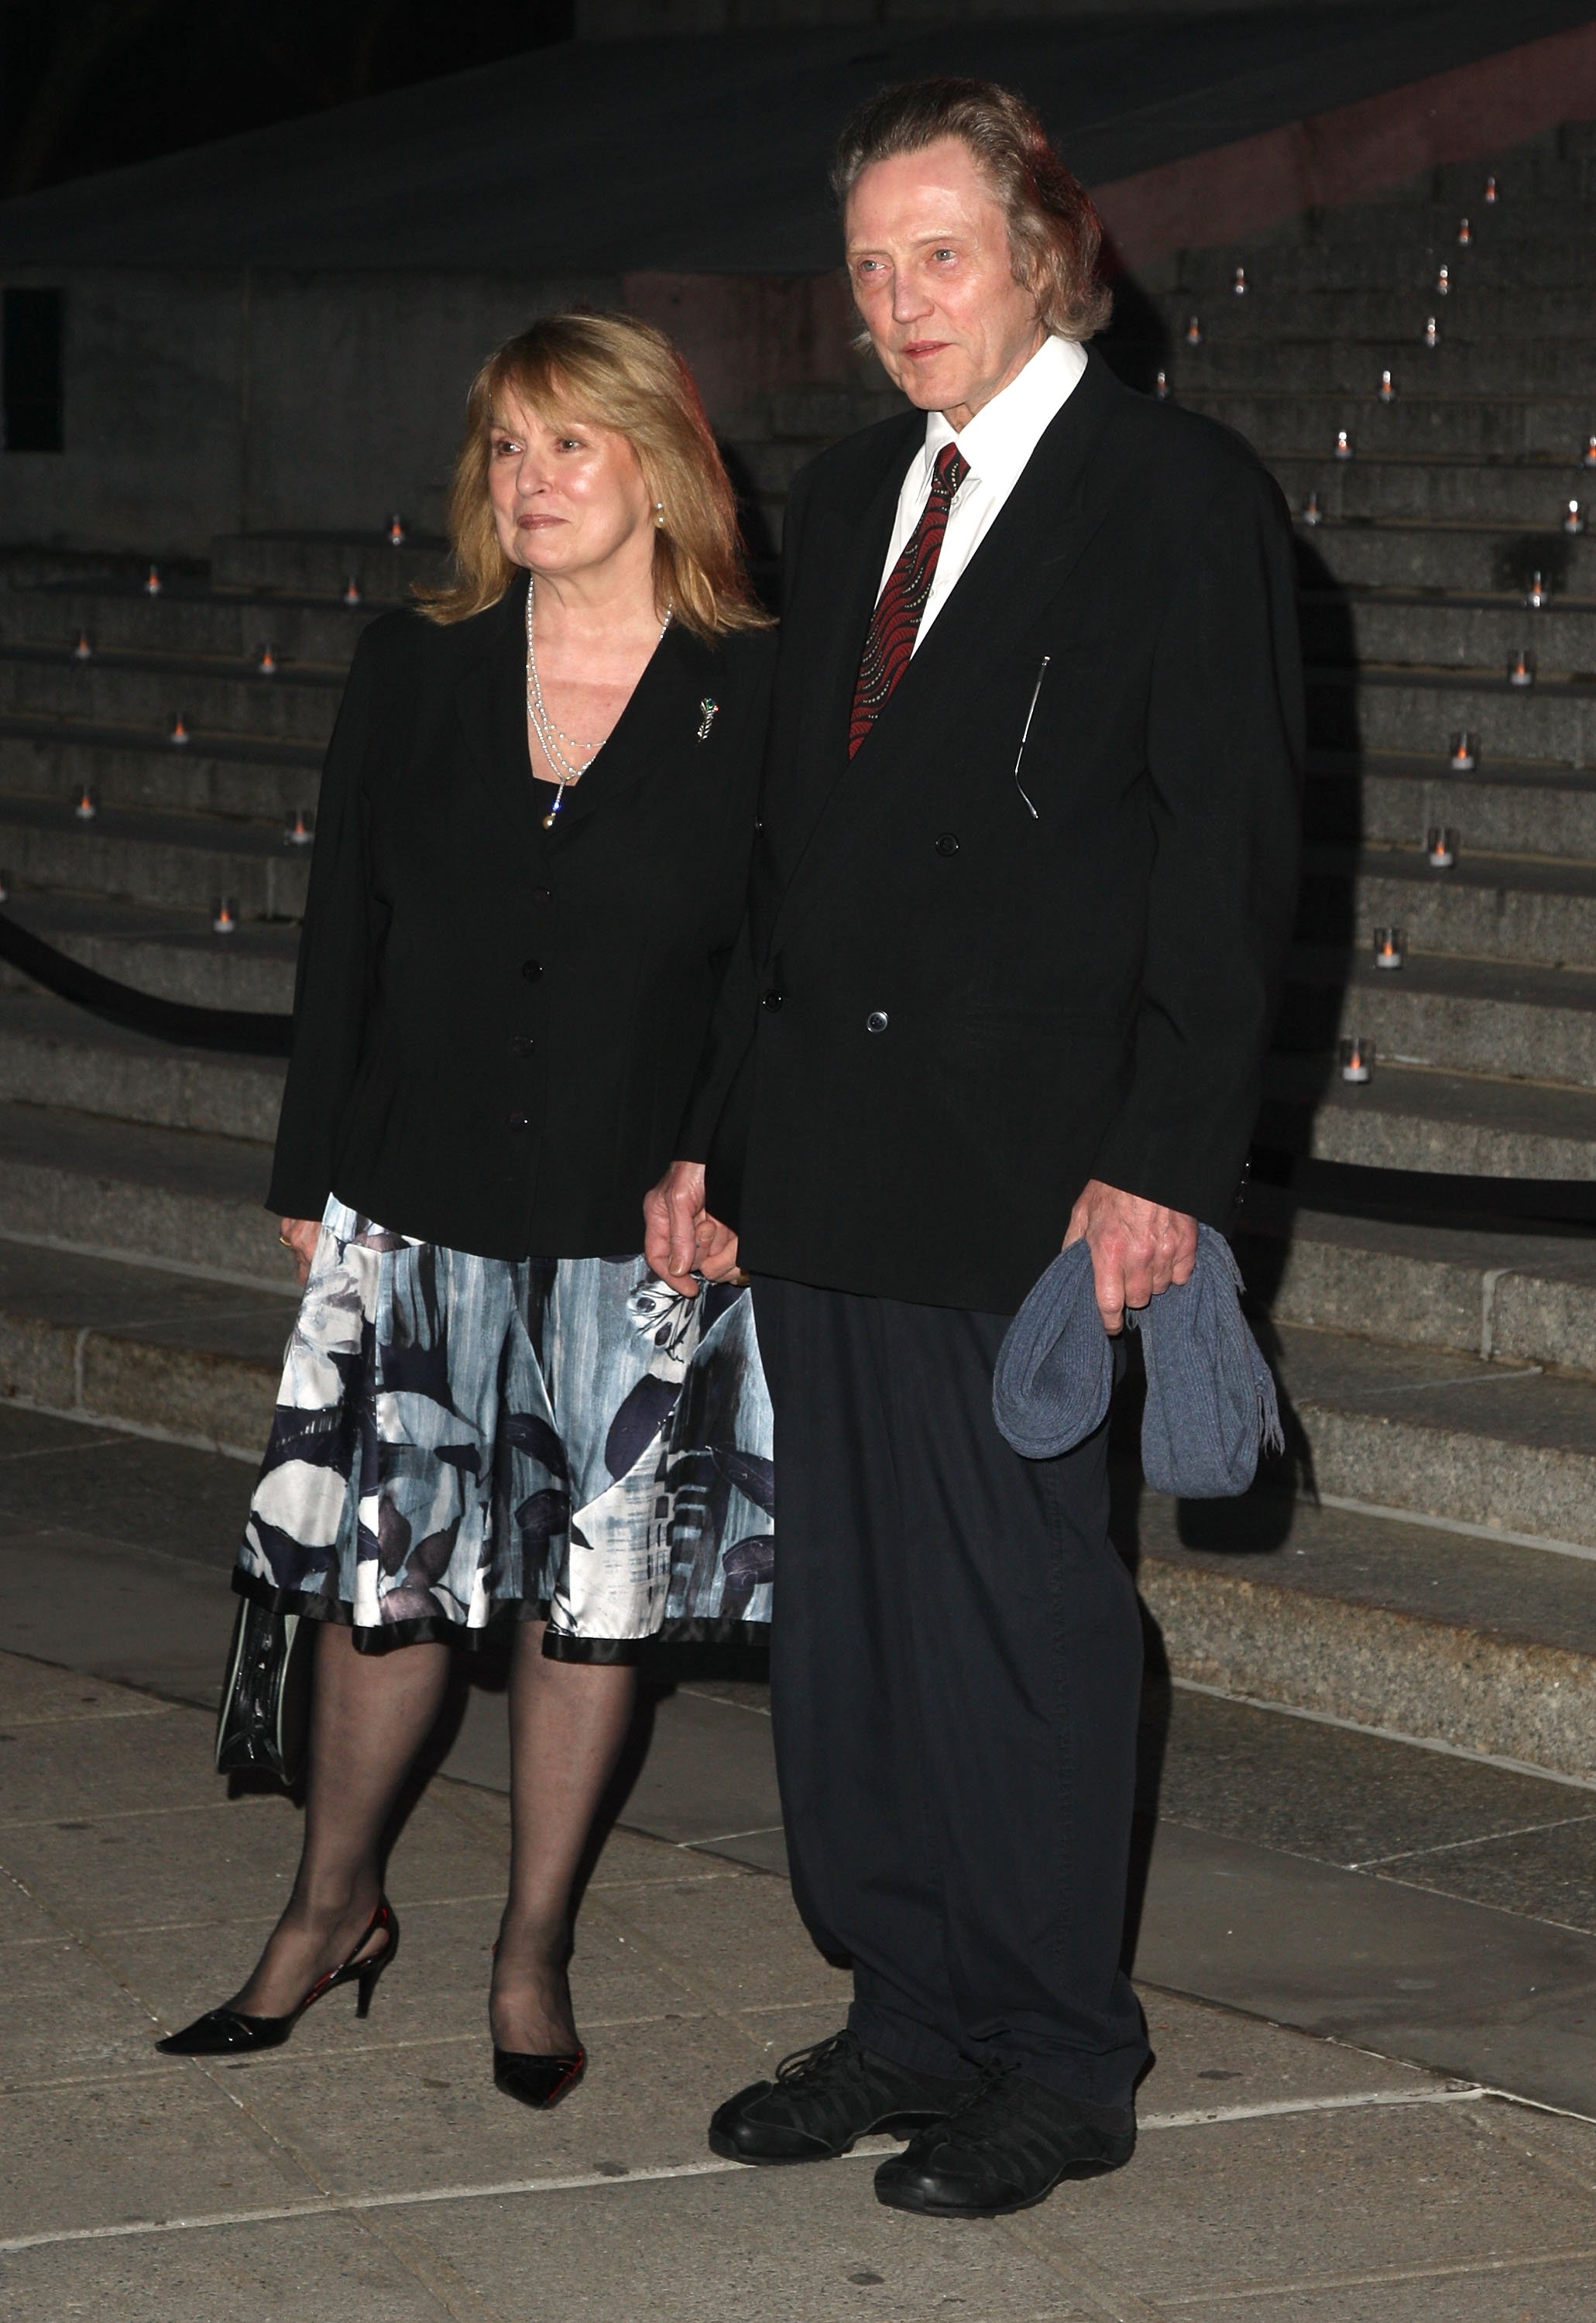 Actor Christopher Walken and wife Georgianne Walken attend the Vanity Fair party for the 2009 Tribeca Film Festival at the State Supreme Courthouse on April 21, 2009 in New York City | Source: Getty Images